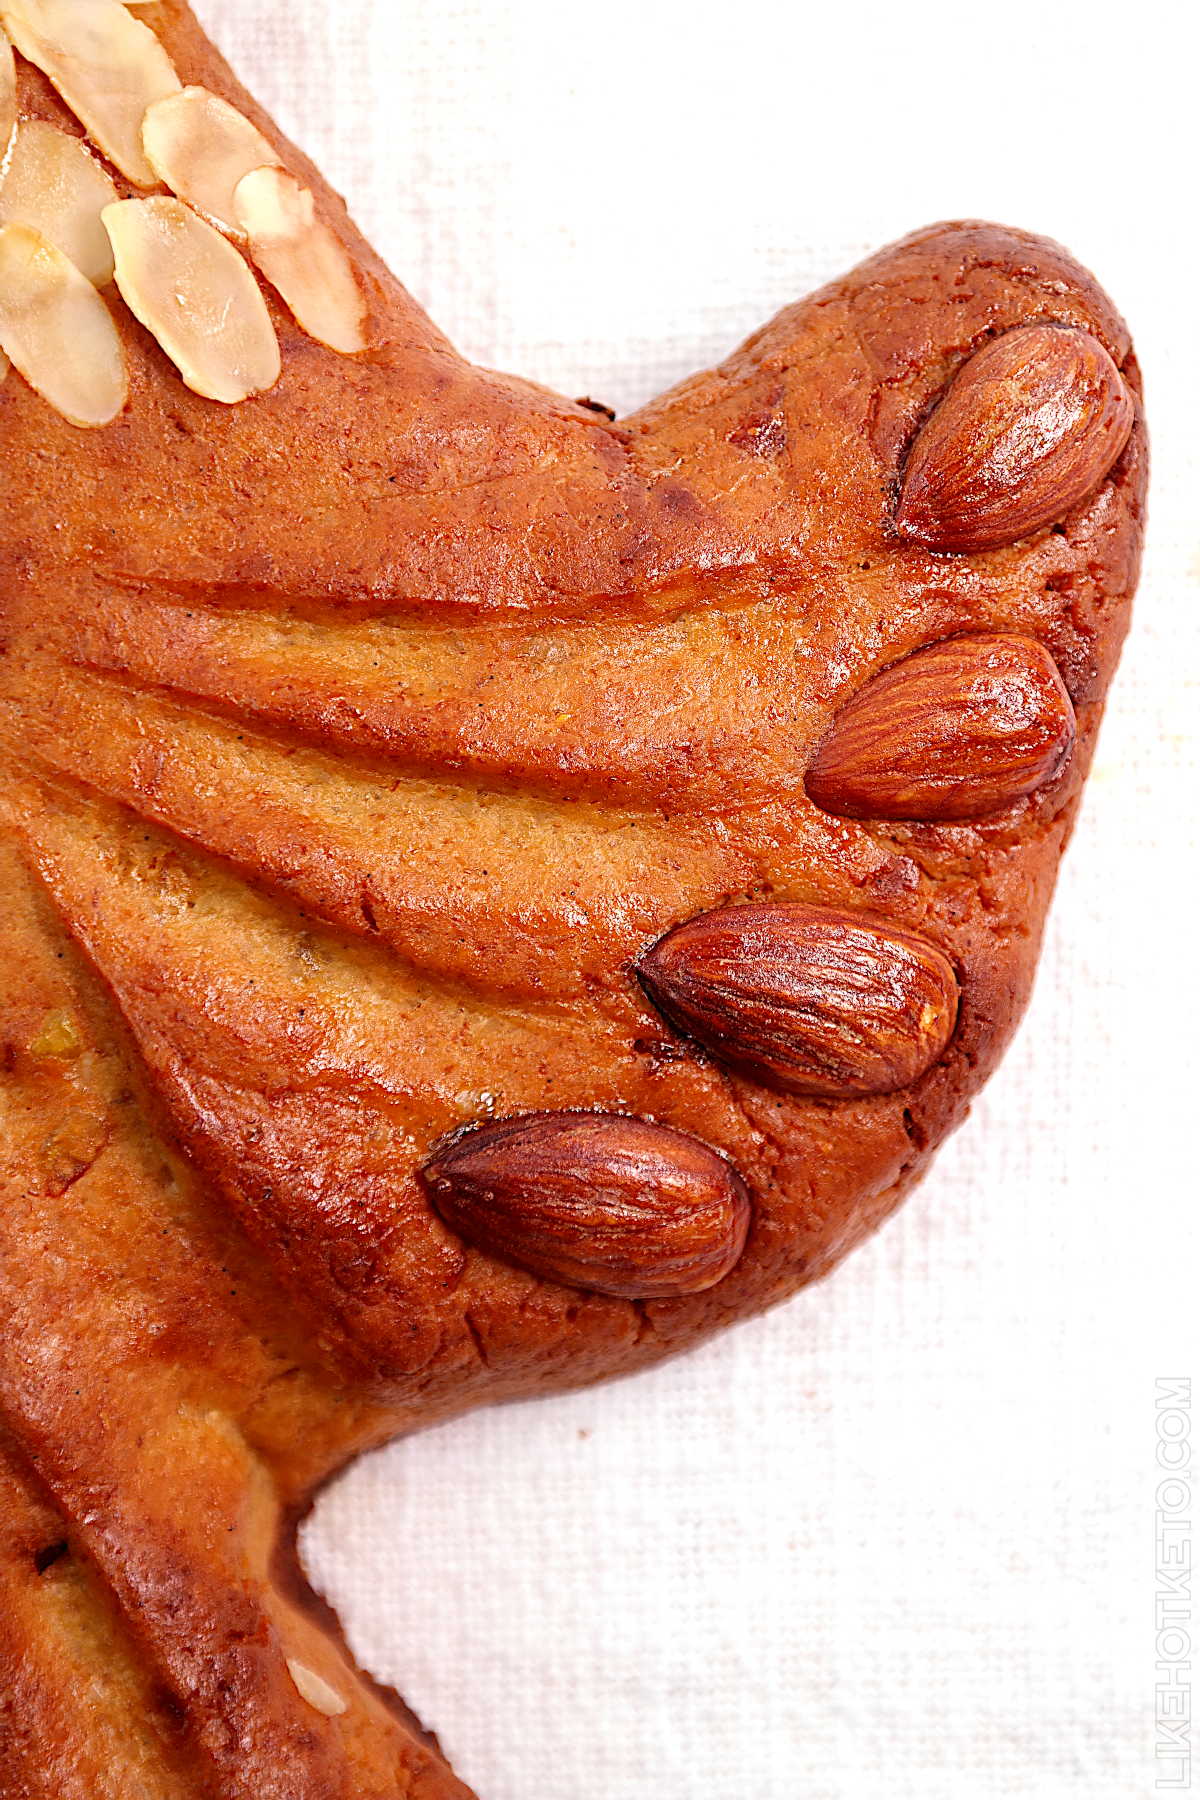 Keto colomba Italian Easter bread, detail of the wing shaped with almonds.